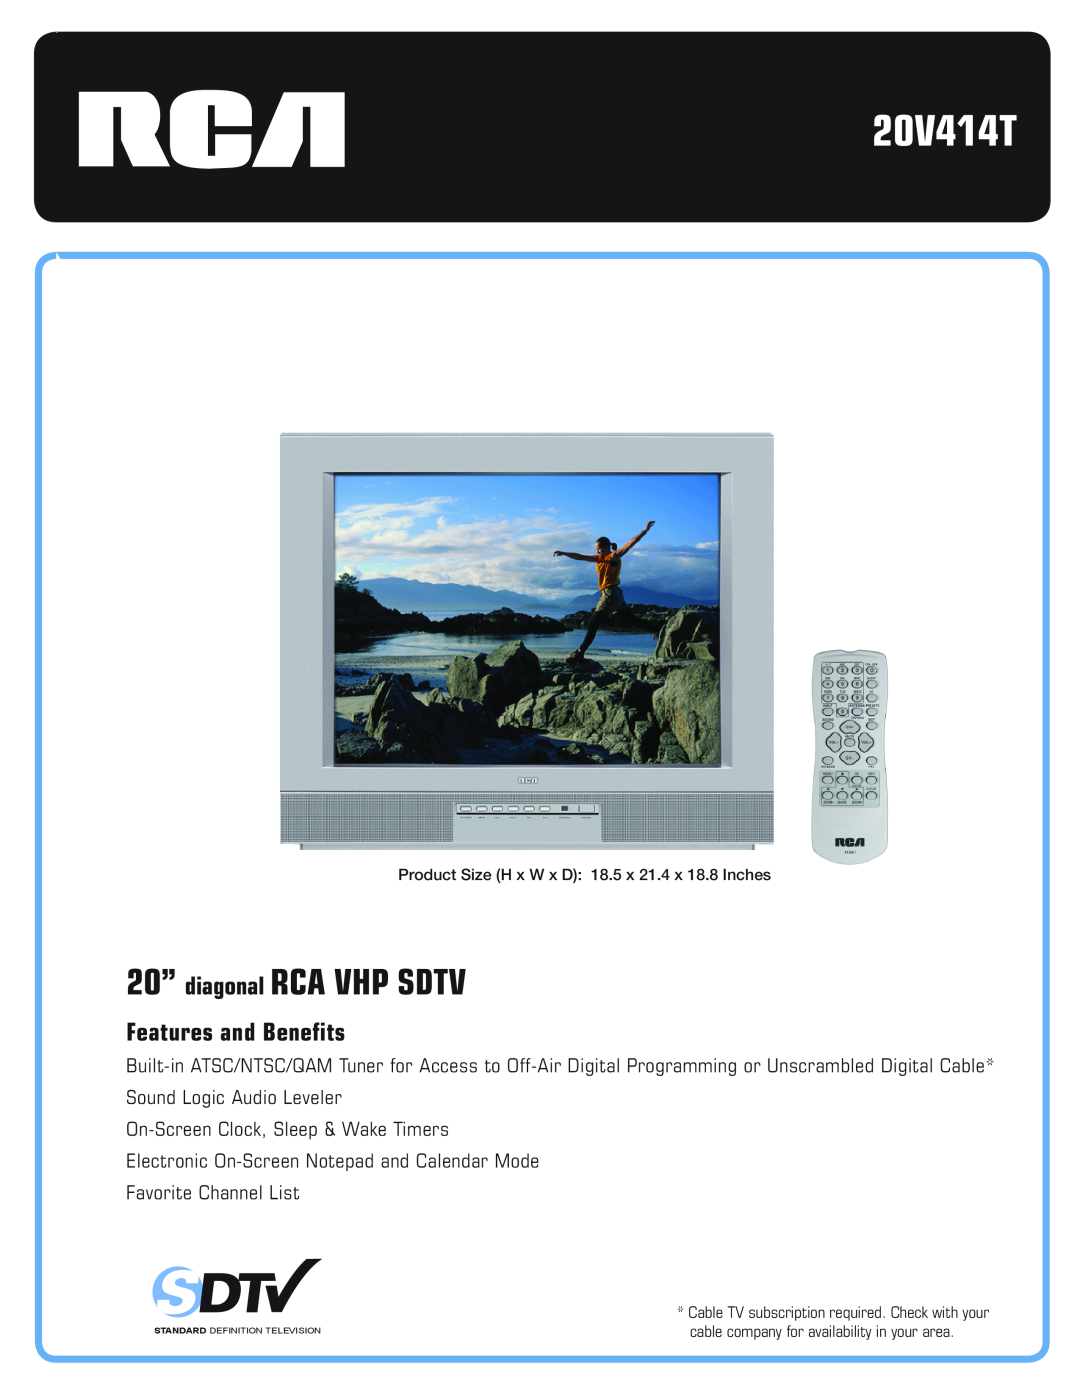 RCA 20V414T manual 20” diagonal RCA VHP SDTV, Features and Benefits 